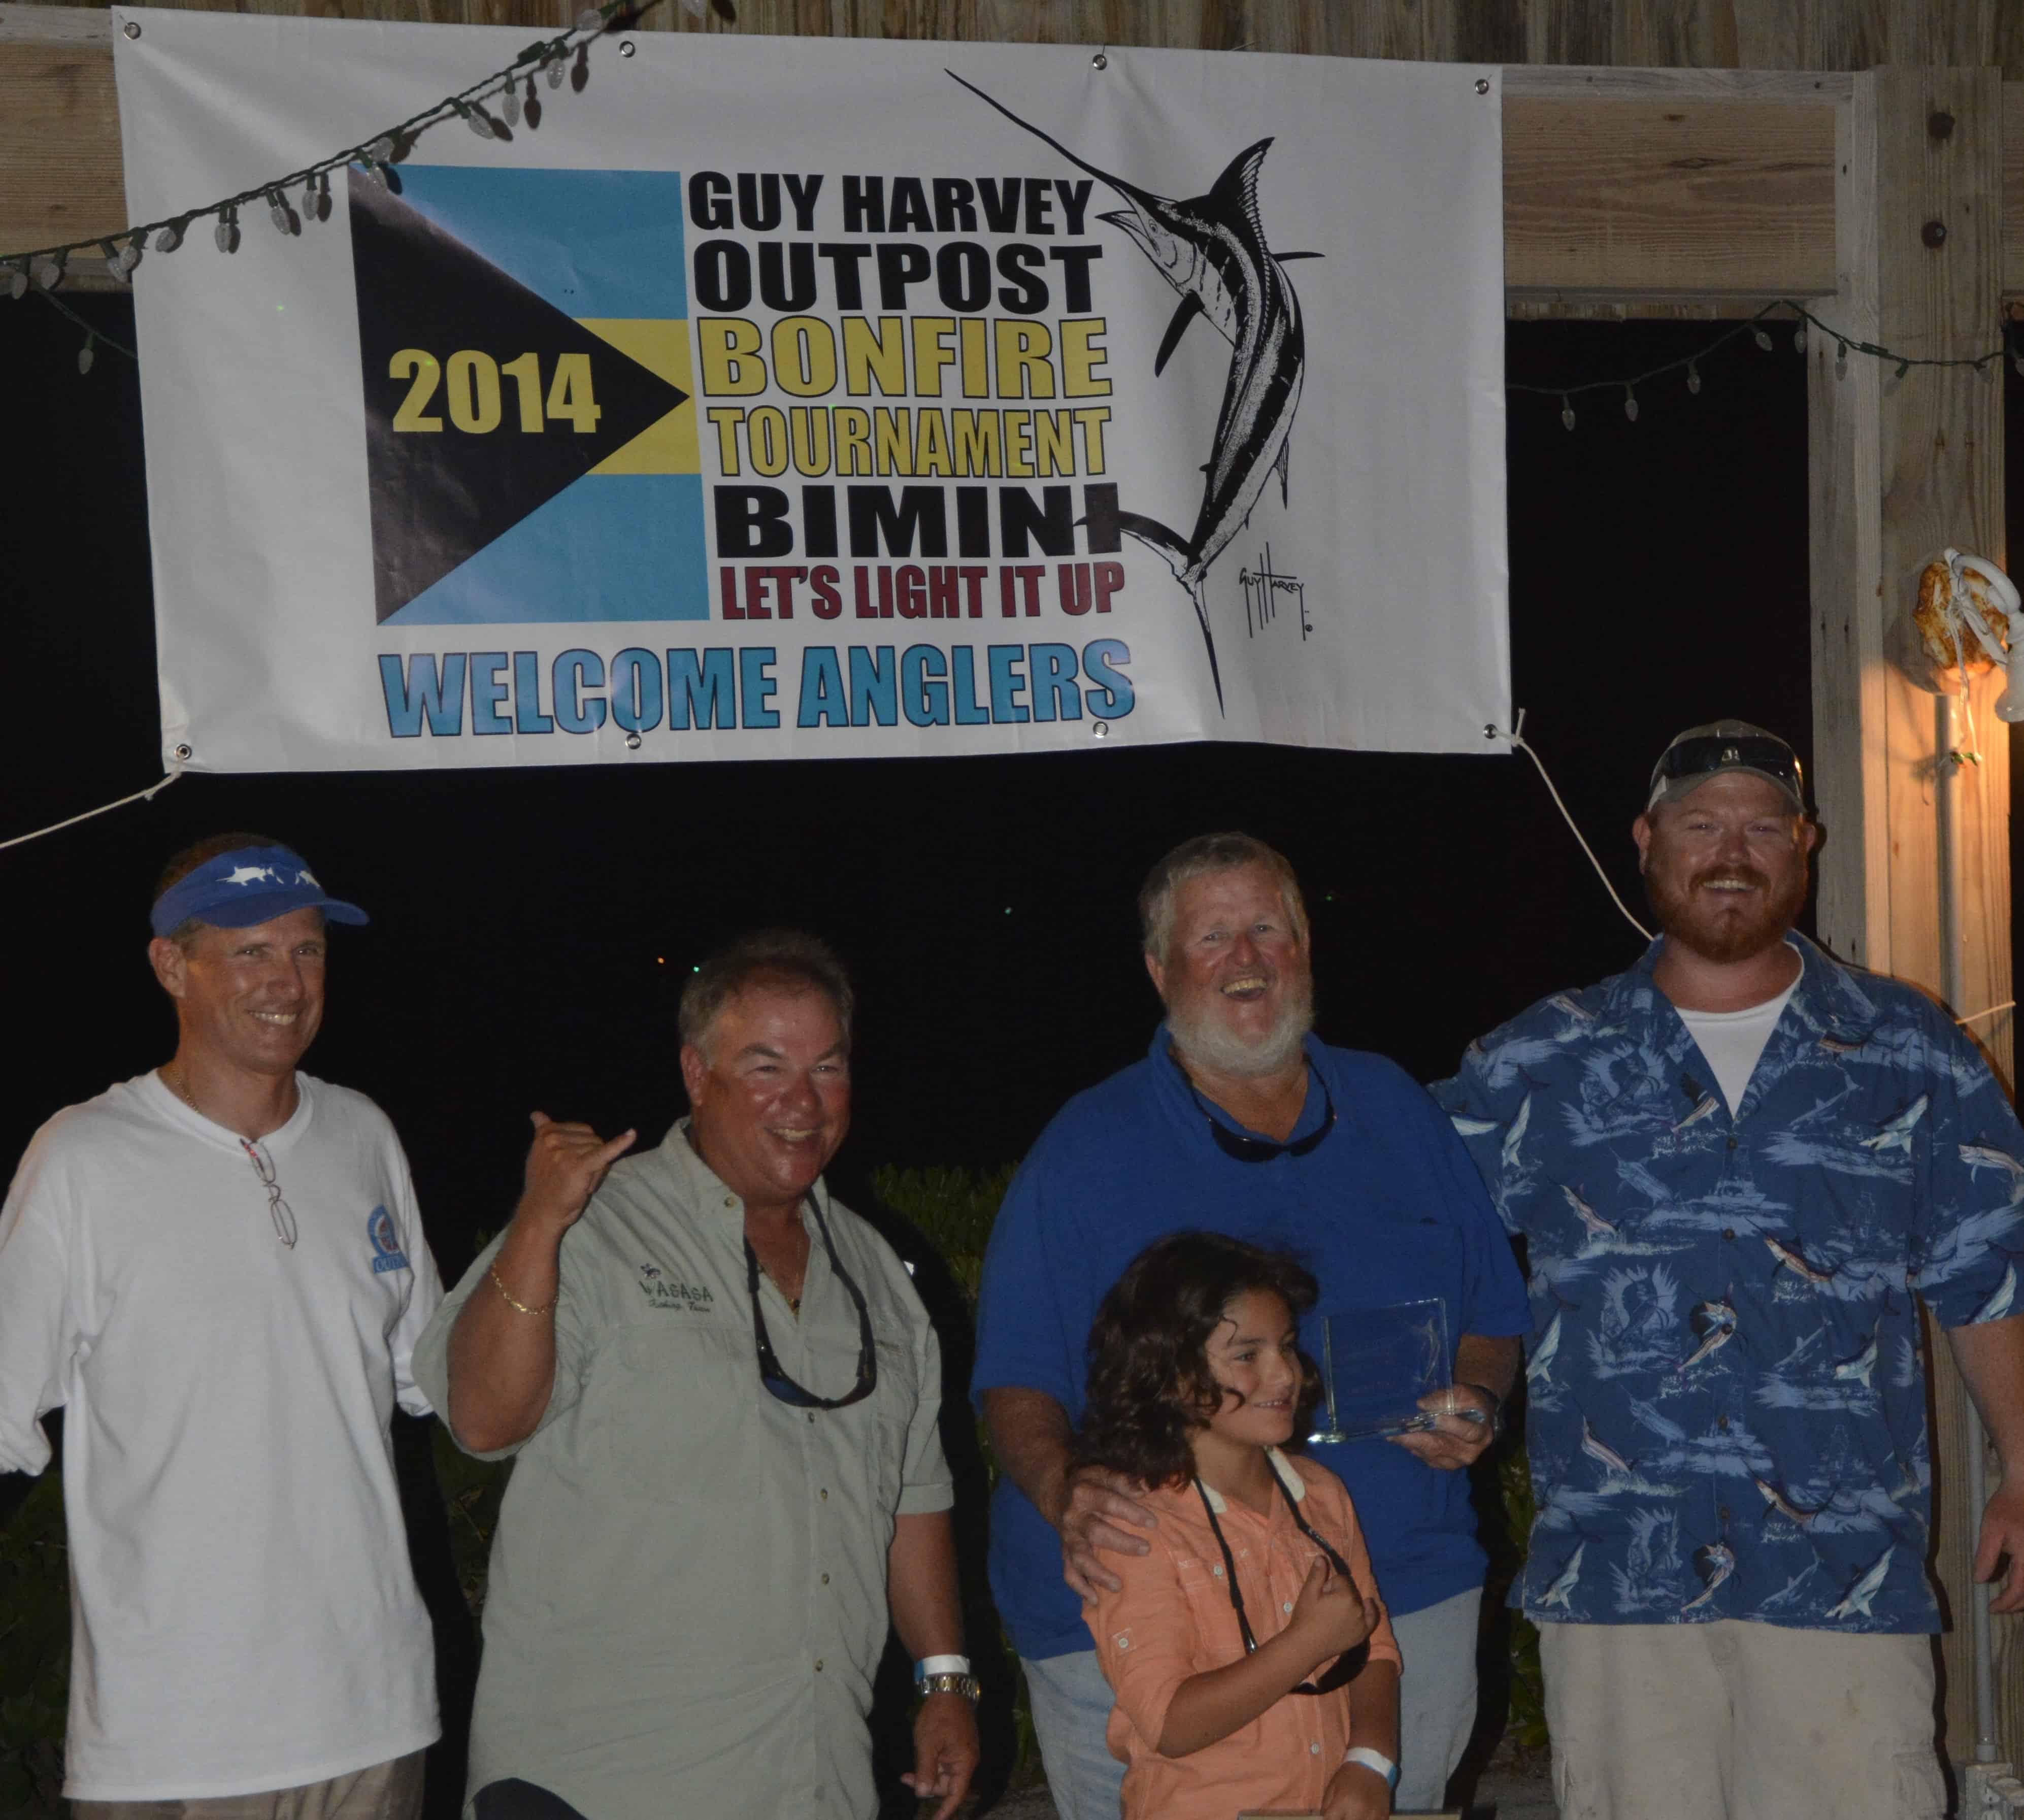 Bouncer's Dusky Takes Top Honors at the Bonfire Tournament! (Click image to enlarge.)